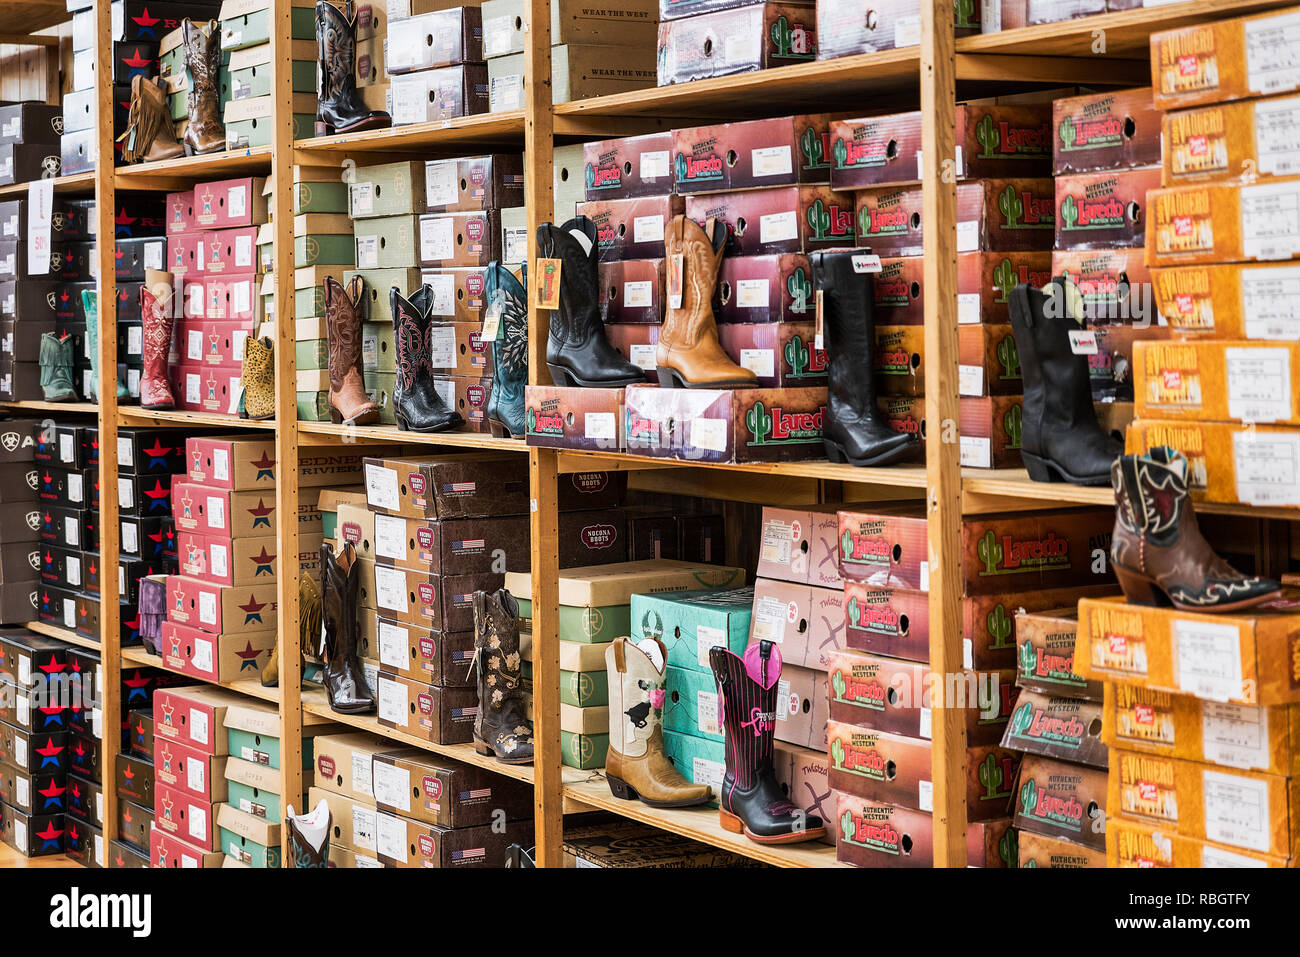 Store cowboy boot display, Nashville, Tennessee, USA. Stock Photo